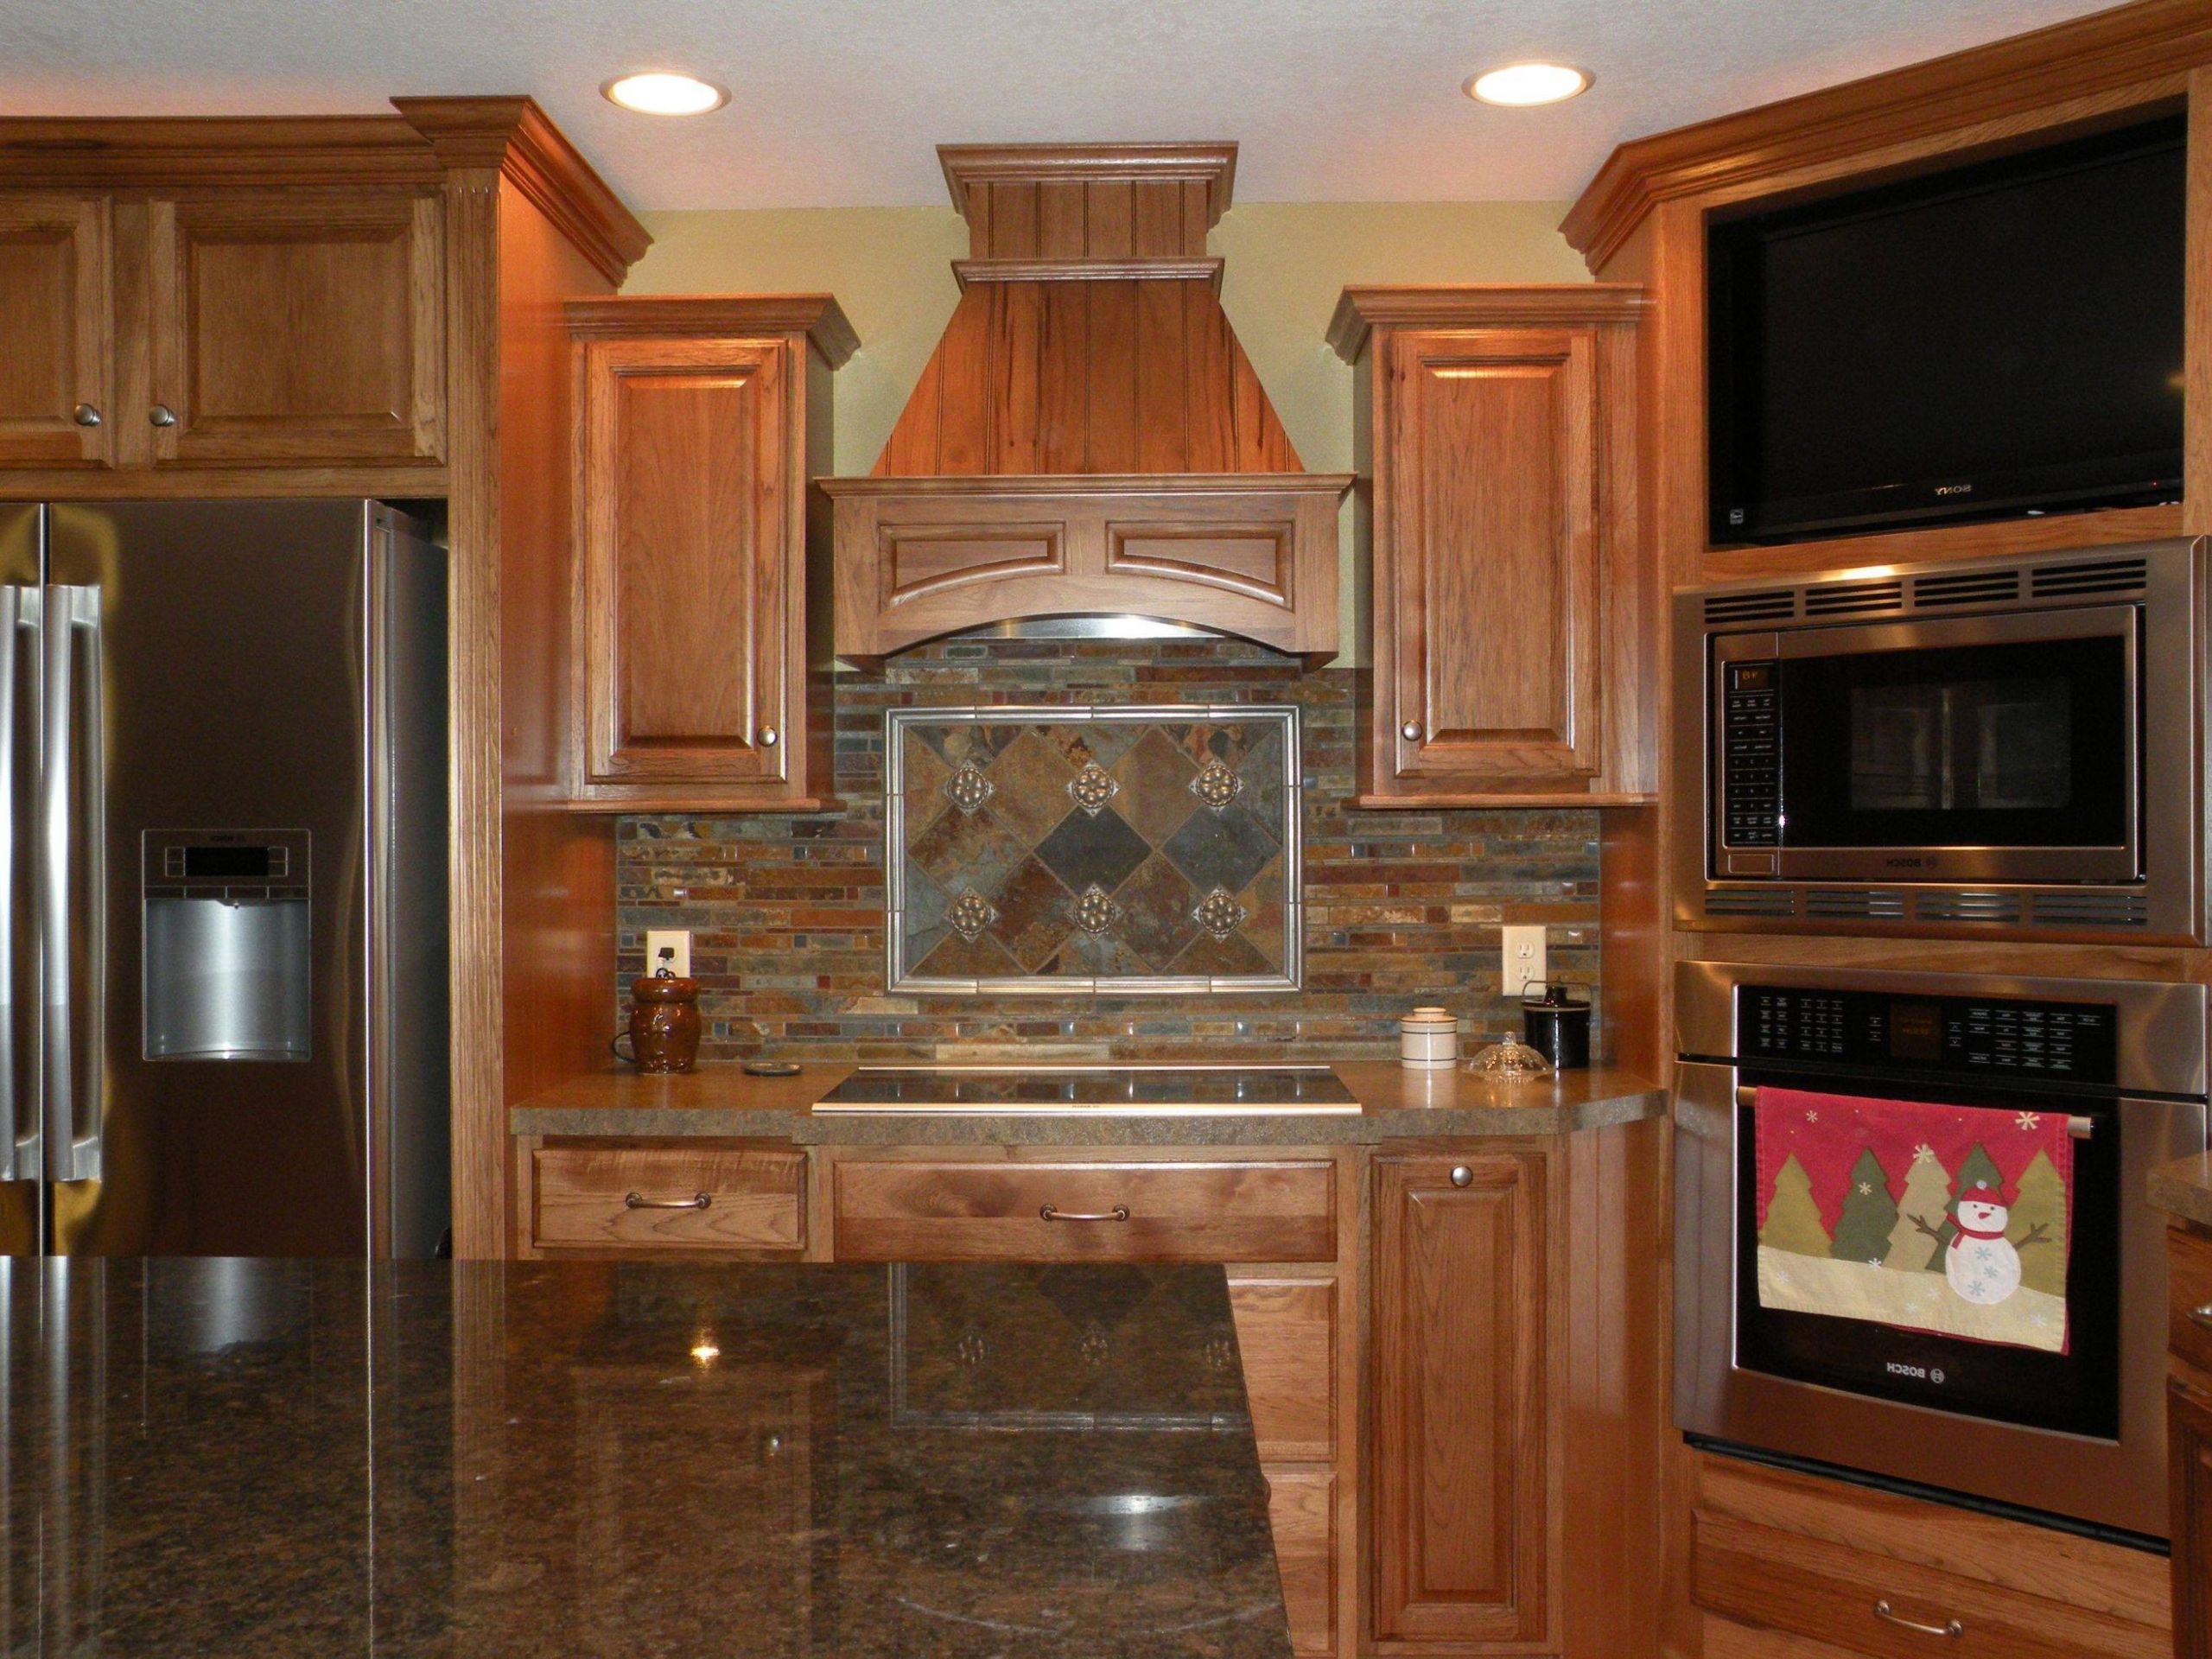 Home Depot Kitchen Remodel Reviews
 Decorating Interesting Kraftmaid Cabinets Reviews For